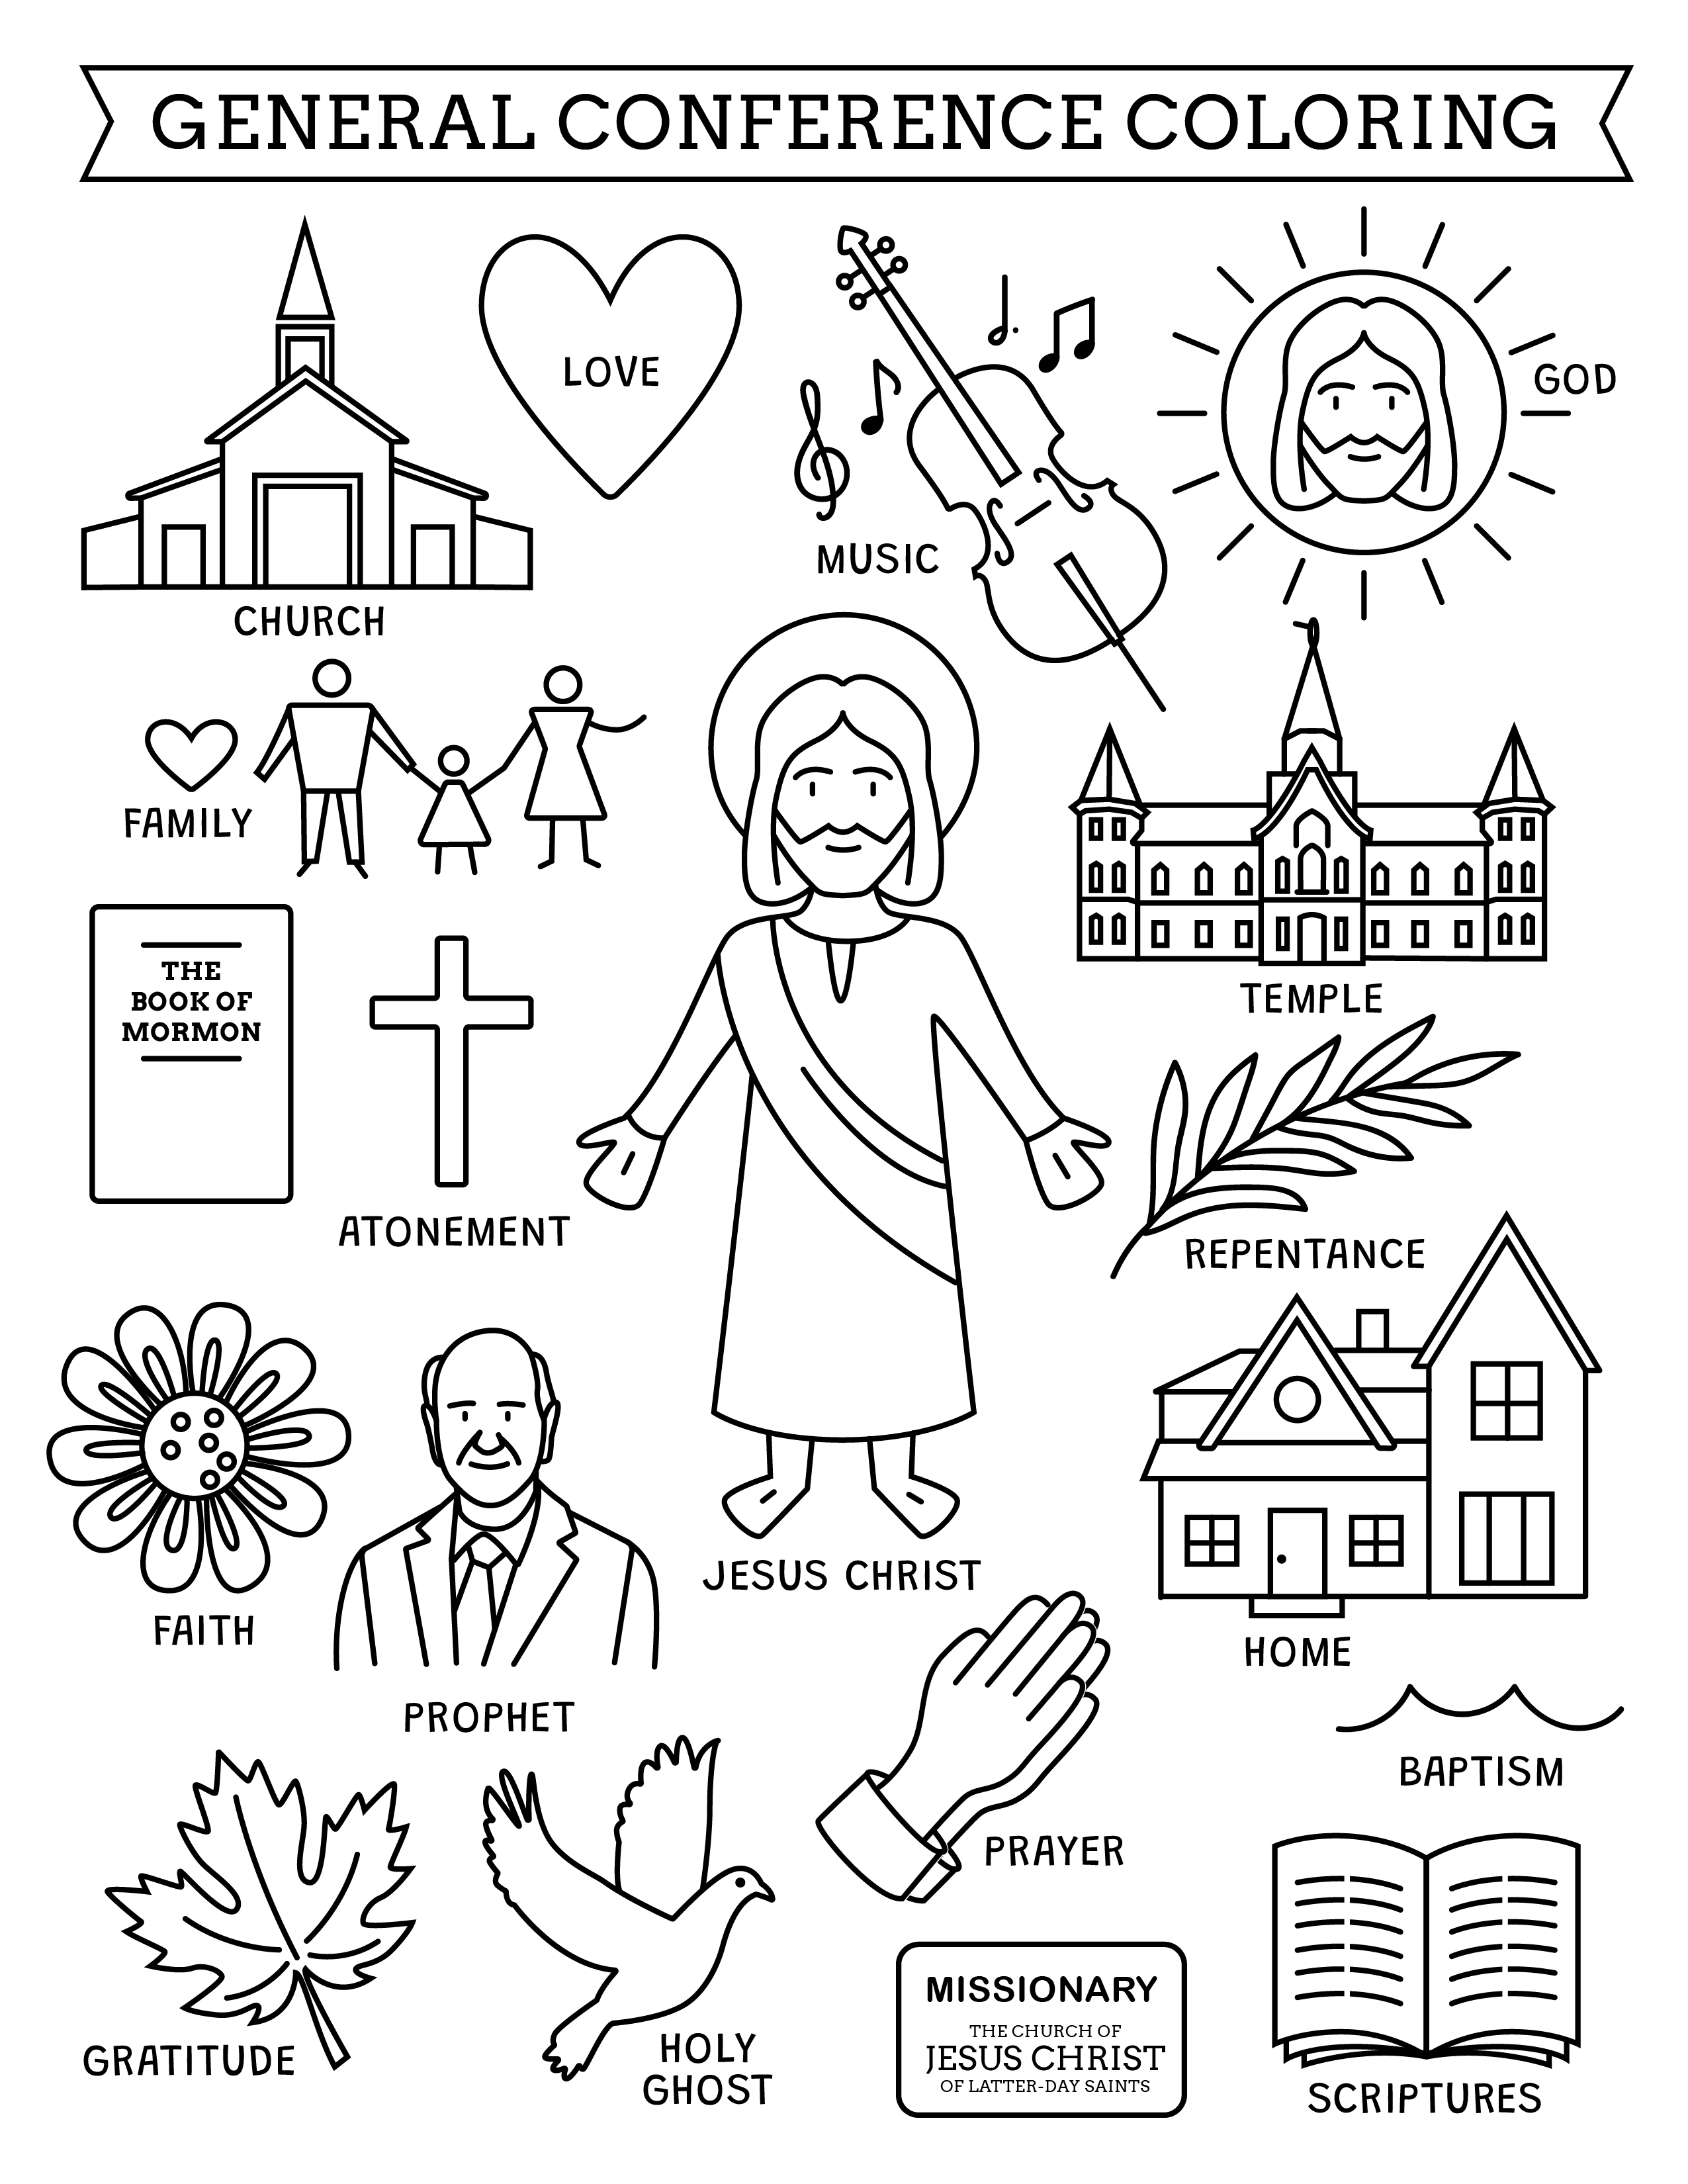 General Conference Coloring